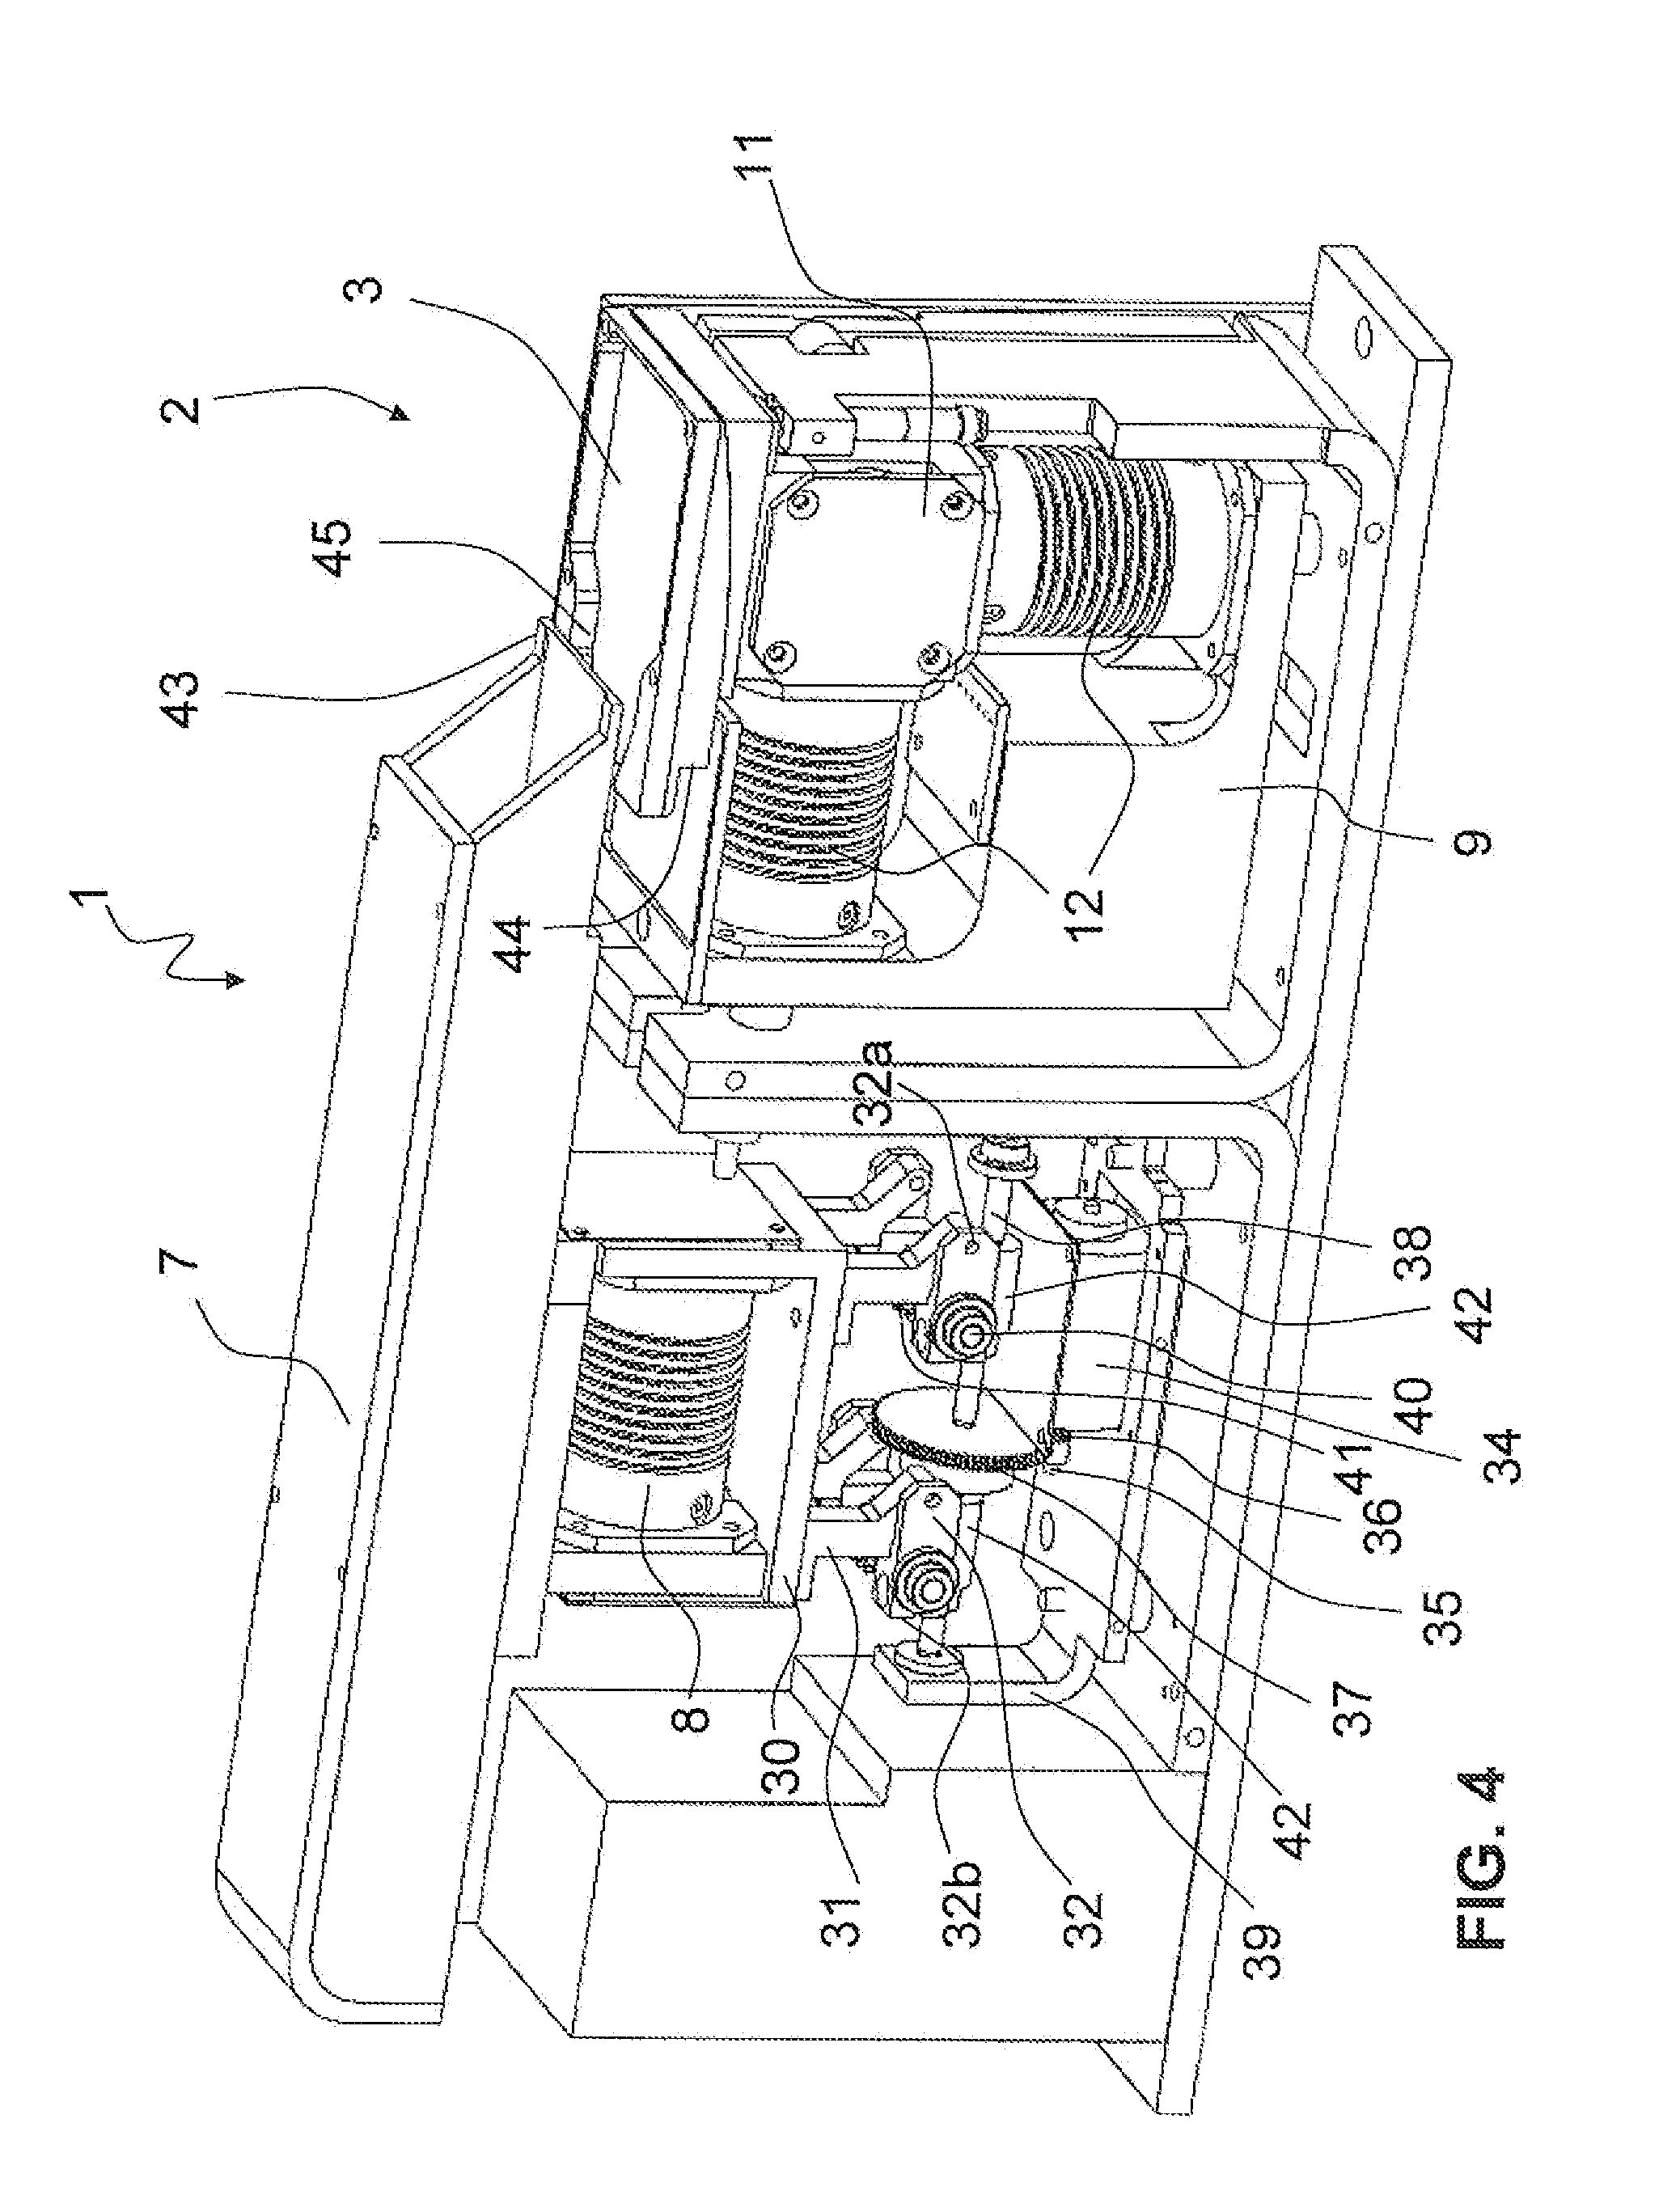 System for supplying components